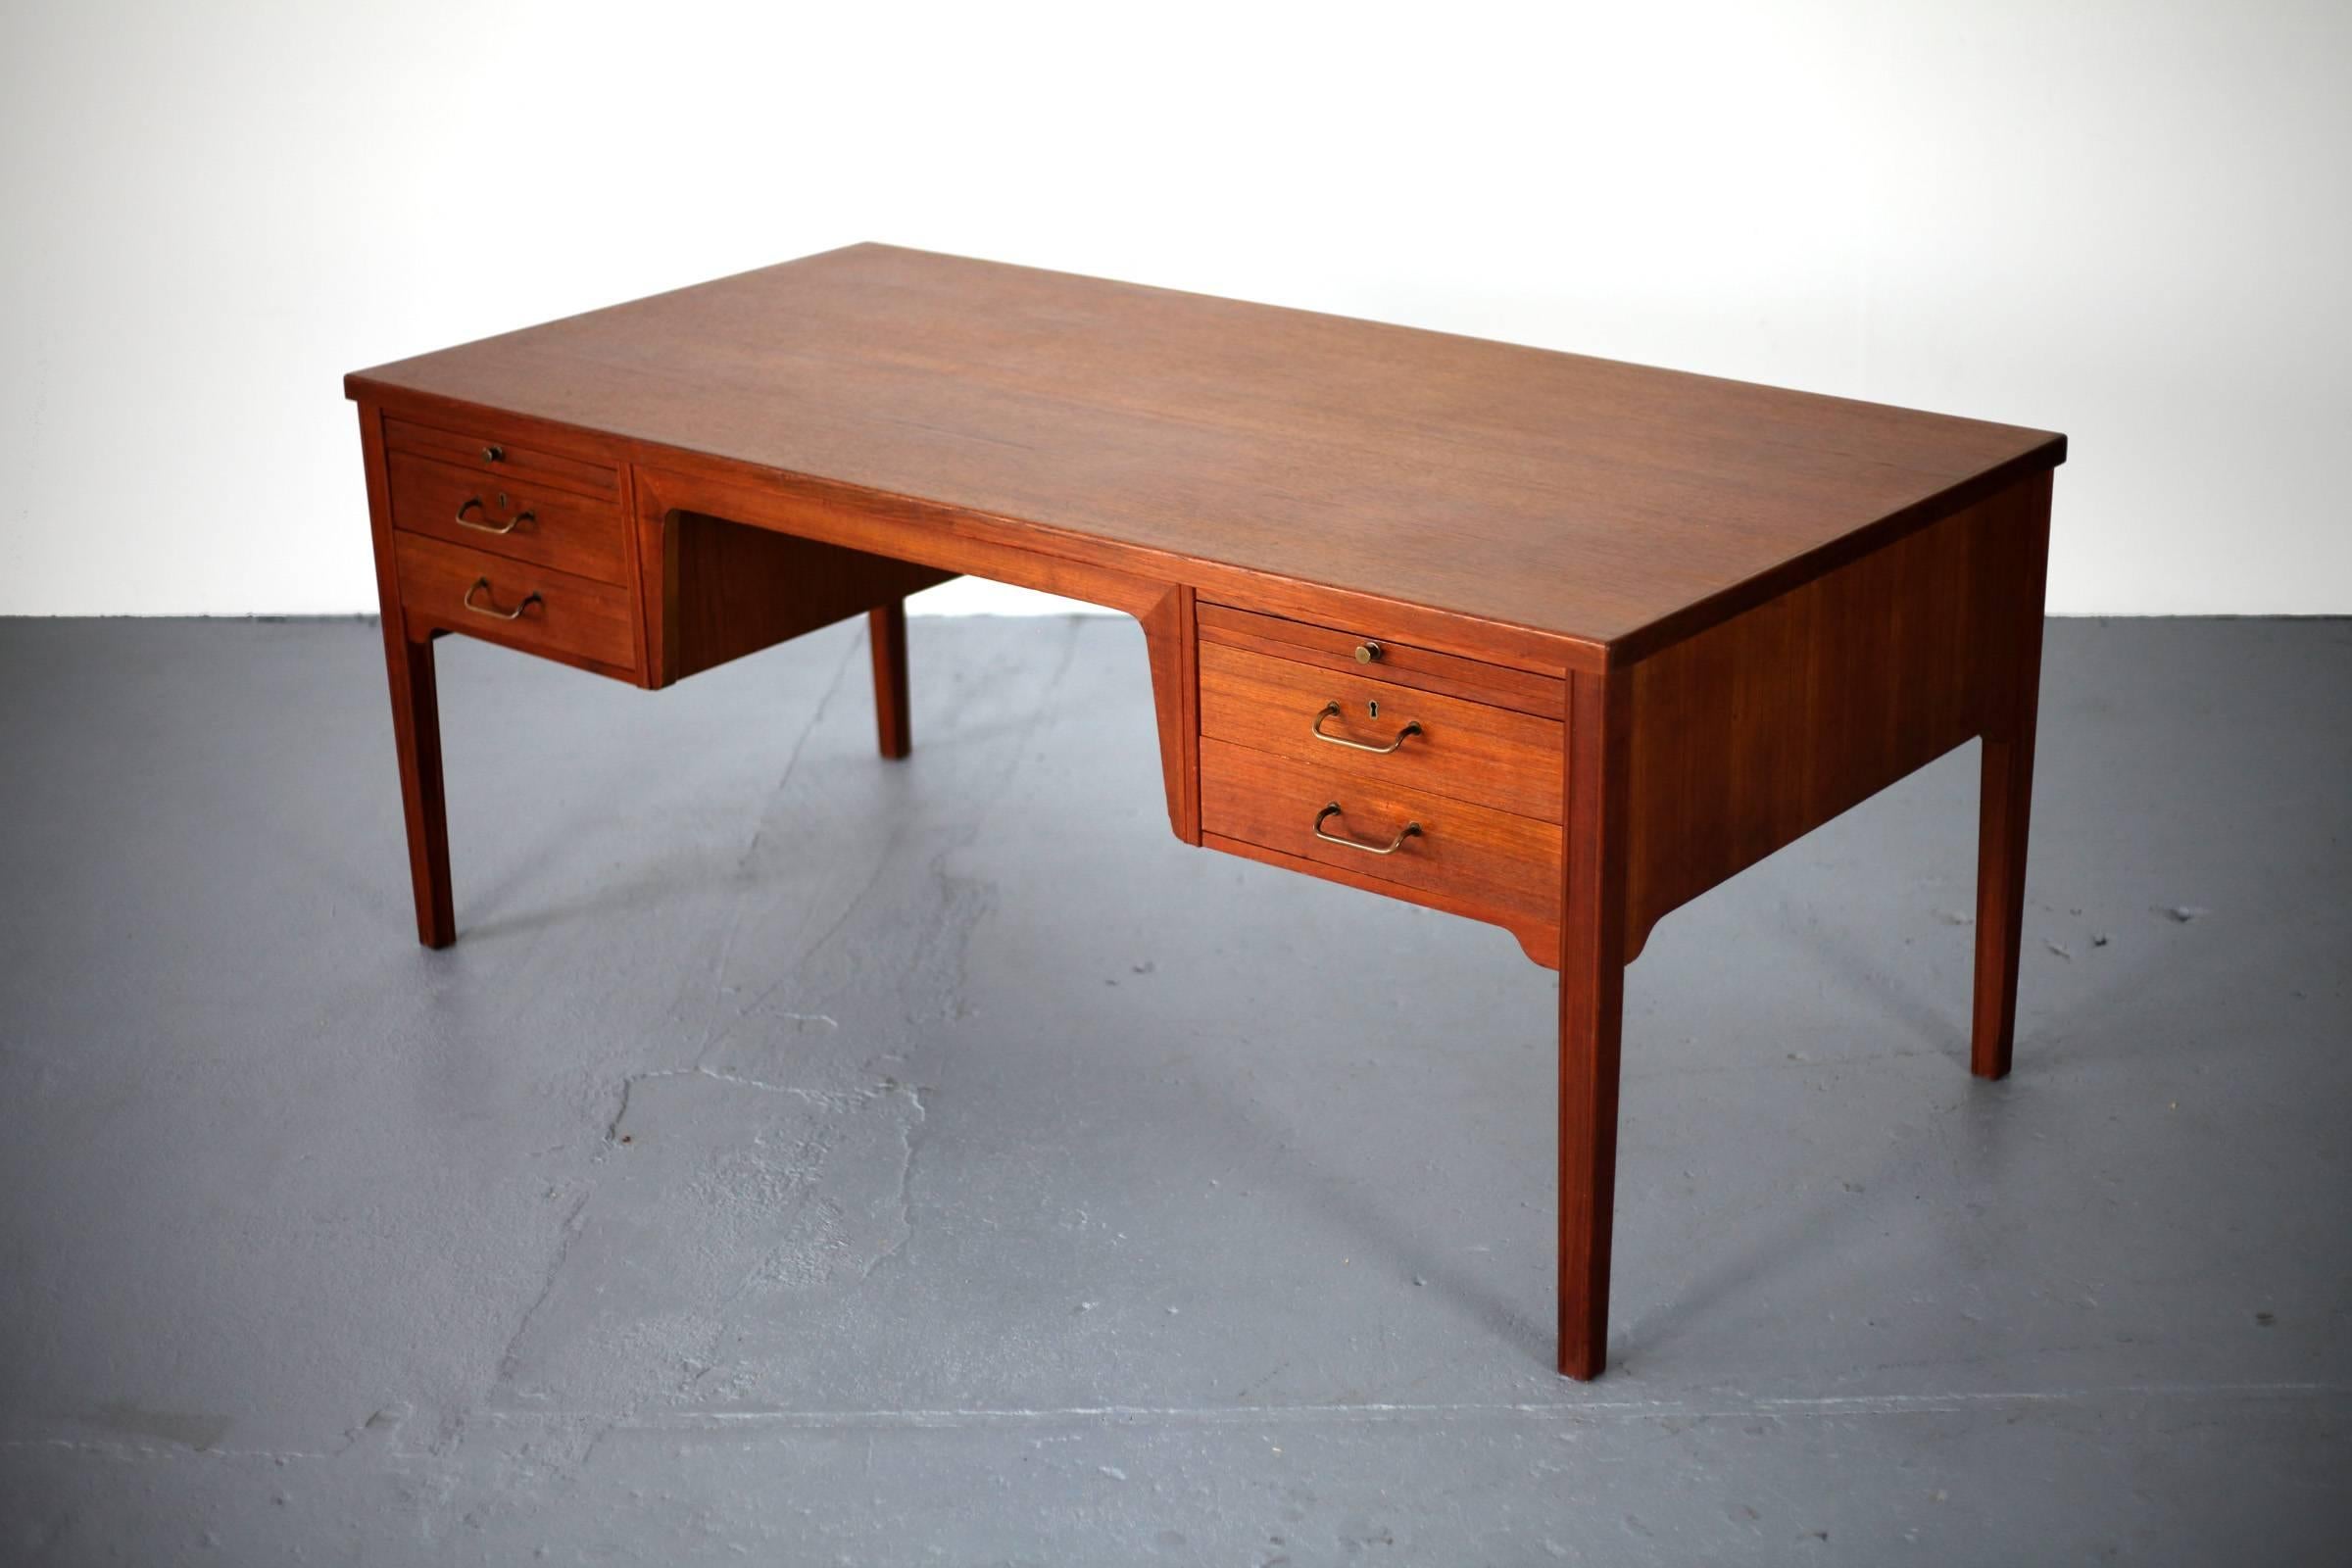 Beautifully executed Danish Modern Teak Desk from the 1950s 1